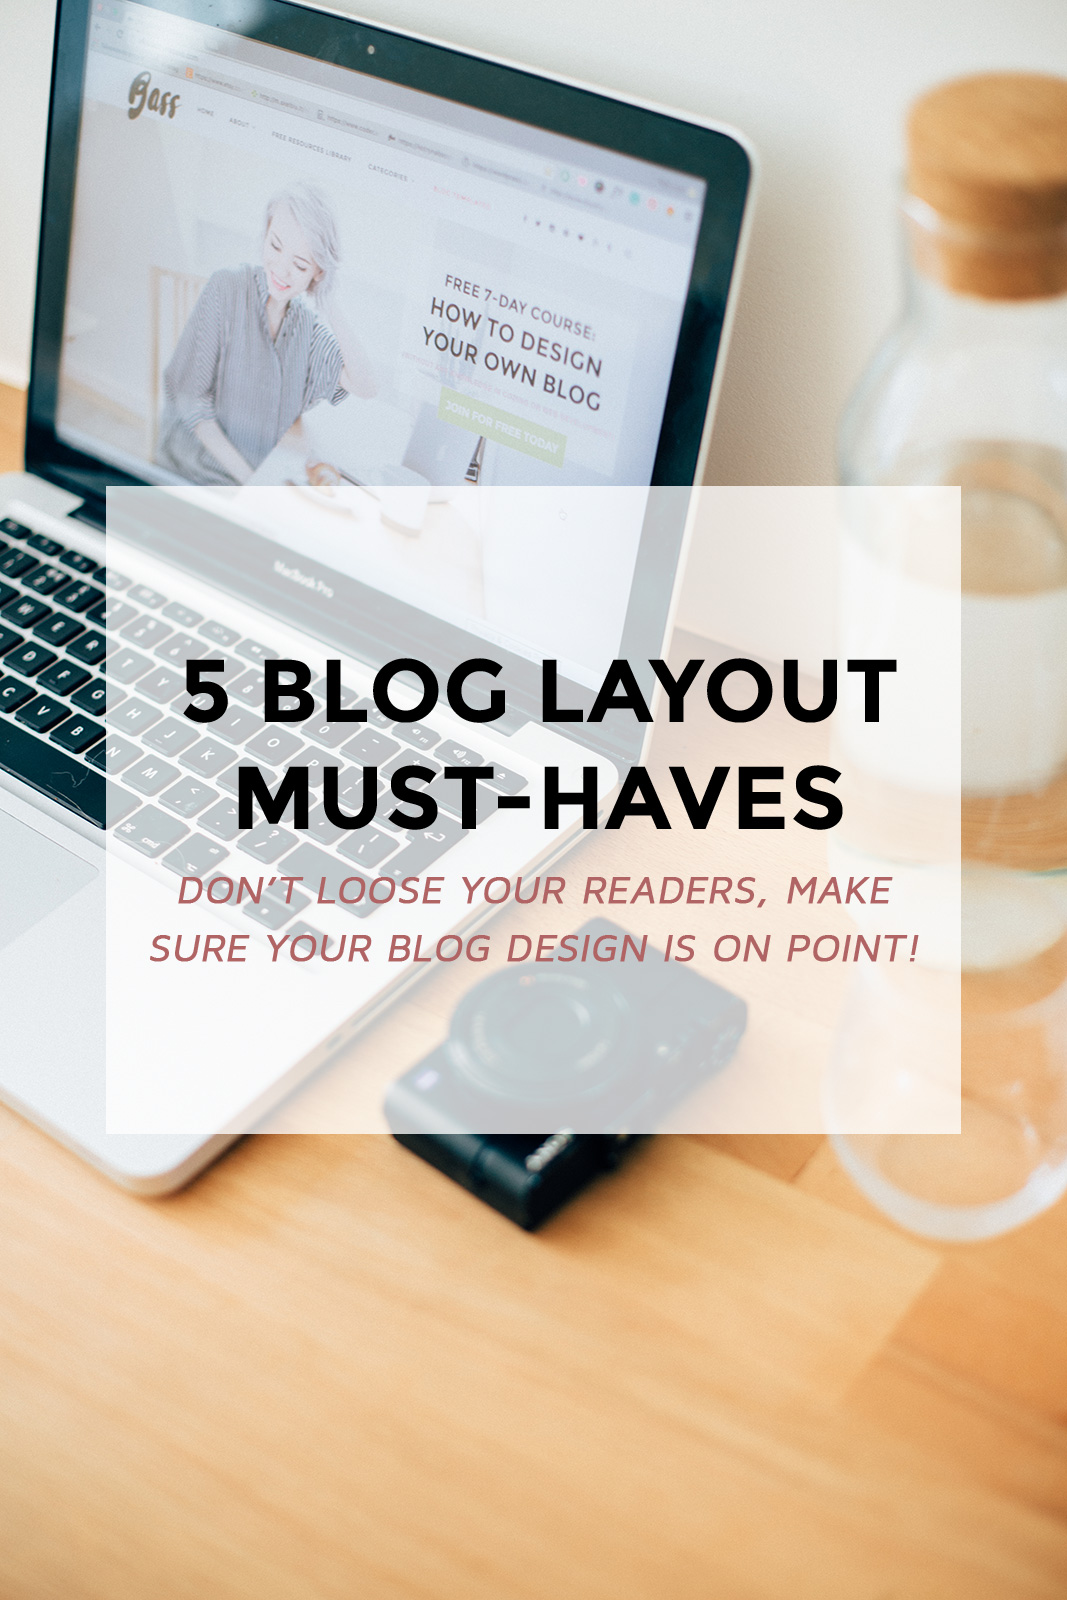 Having a professional blog design is a must for every blogger trying to turn their blogging into a full-time job. I can’t tell you how many times I ignored blog’s content if the layout was not user-friendly & text was hard to read. Don’t risk on losing potential readers and make sure your blog layout has these 5 must-haves!